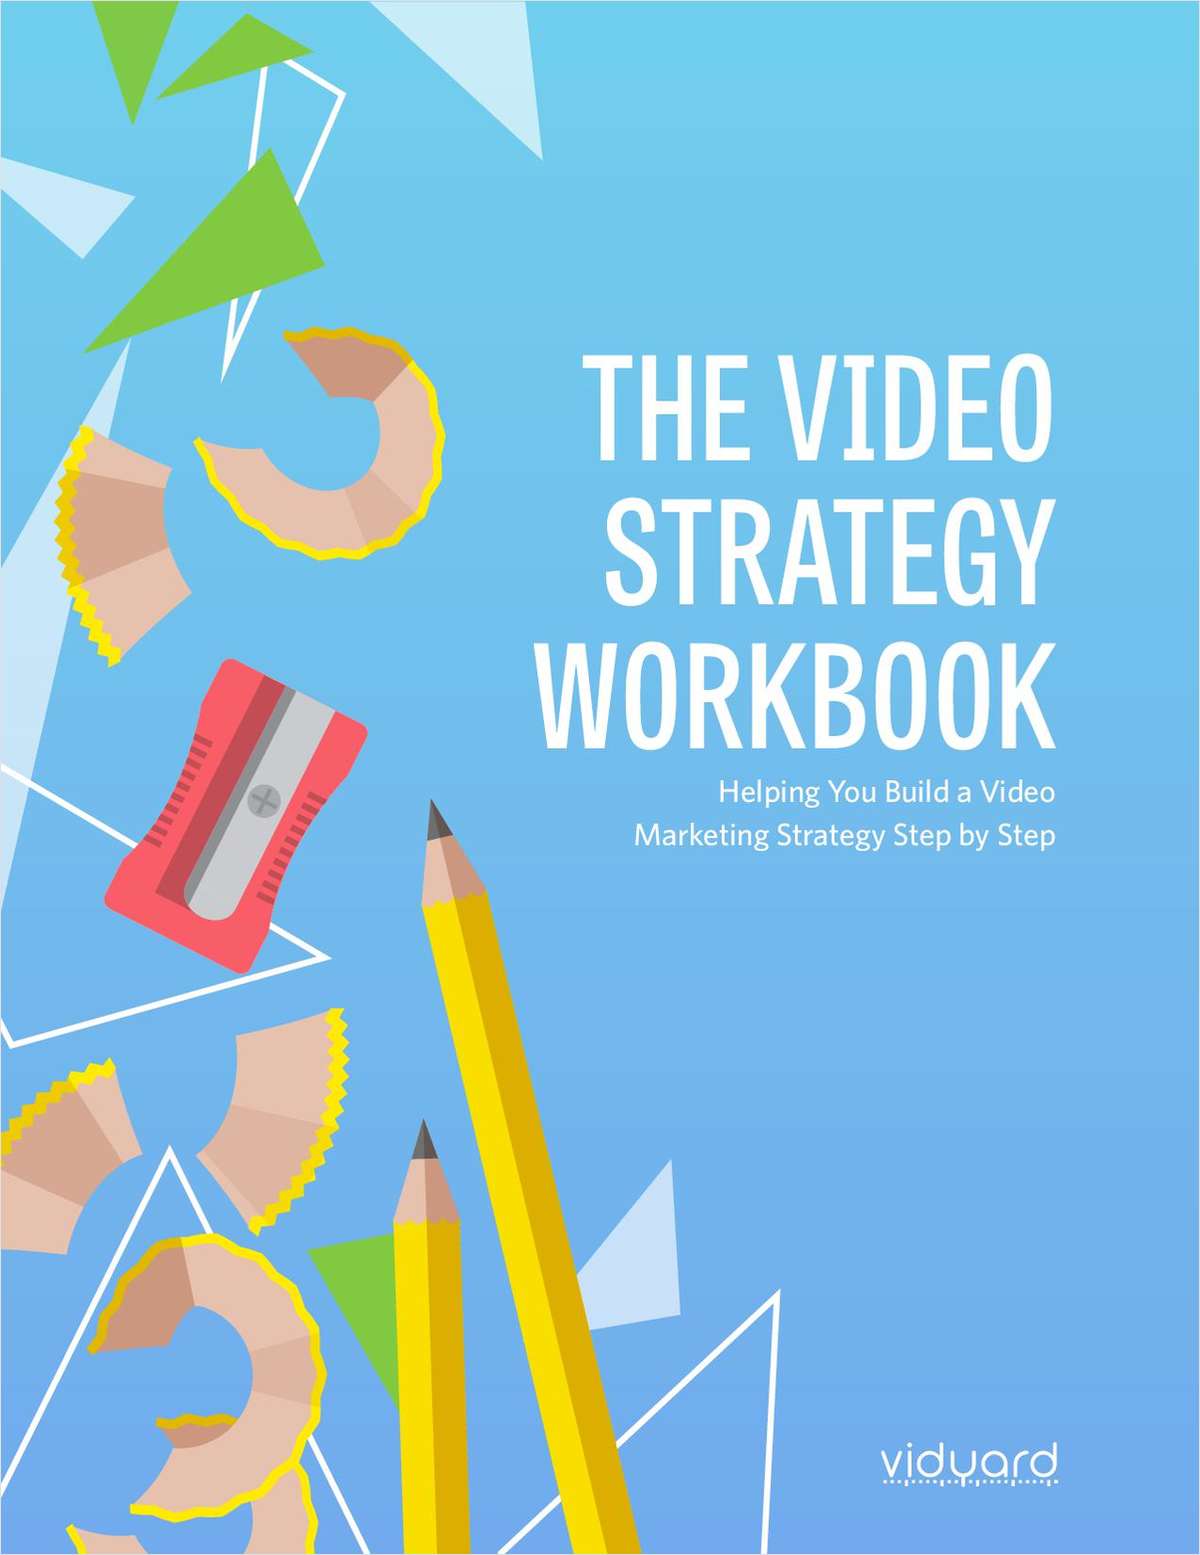 The Video Strategy Workbook